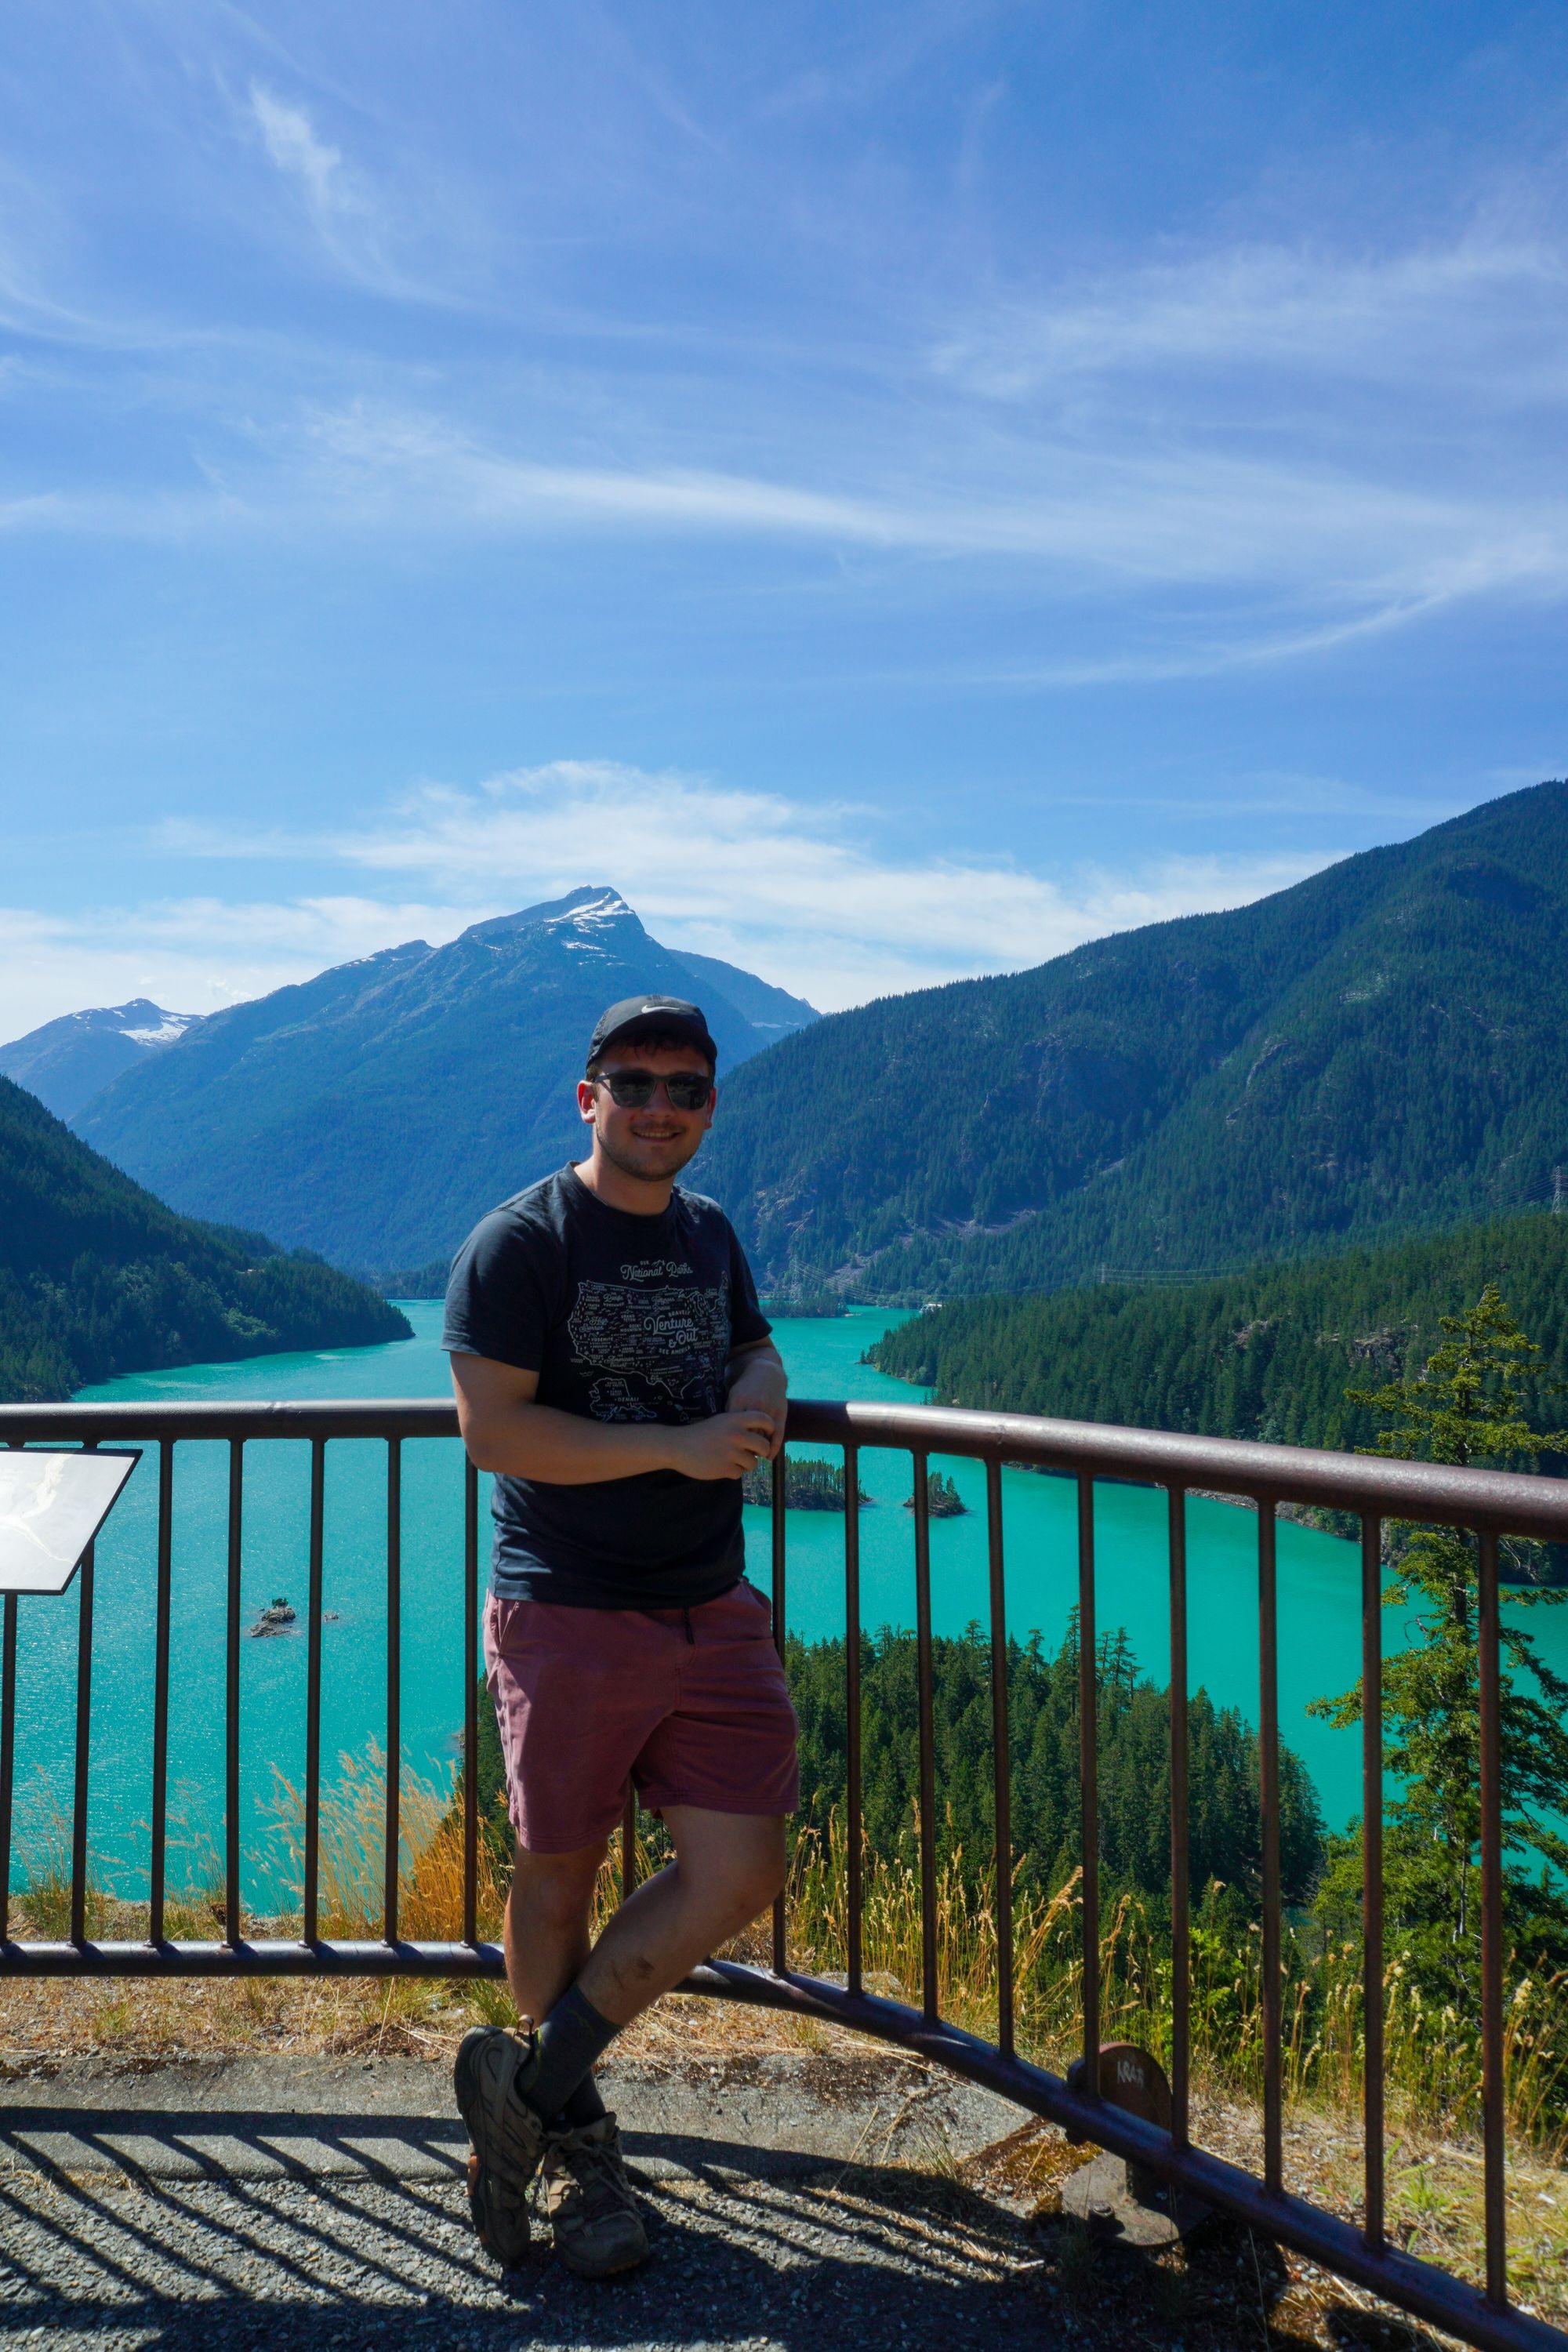 One day in North Cascades National Park